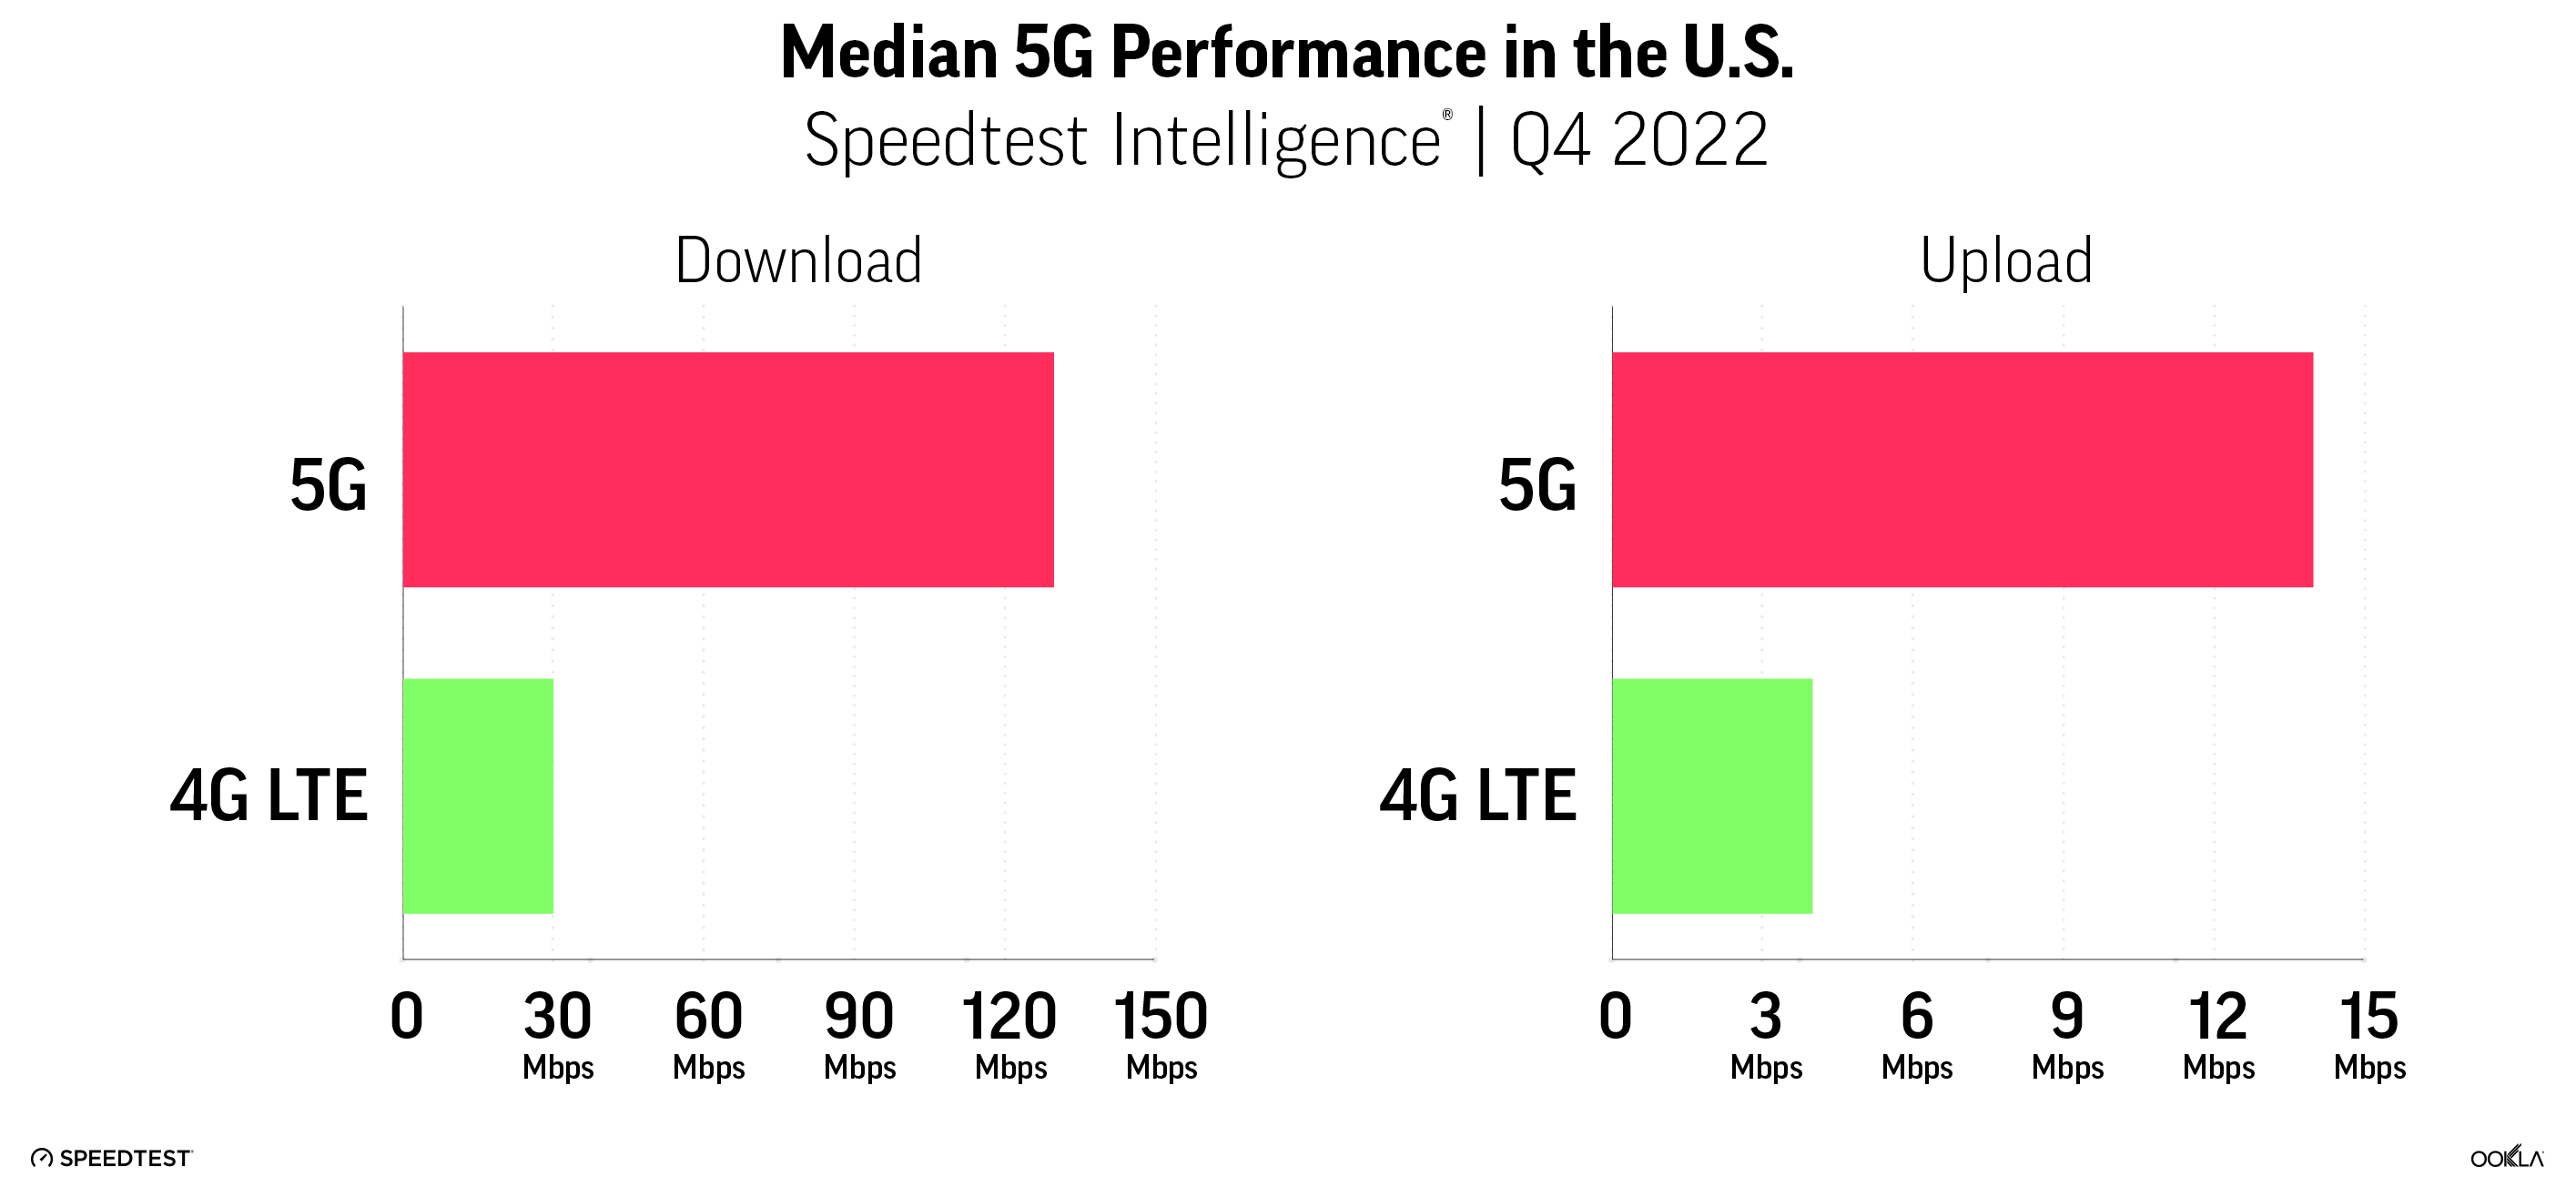 Median 5G Performance in the U.S.